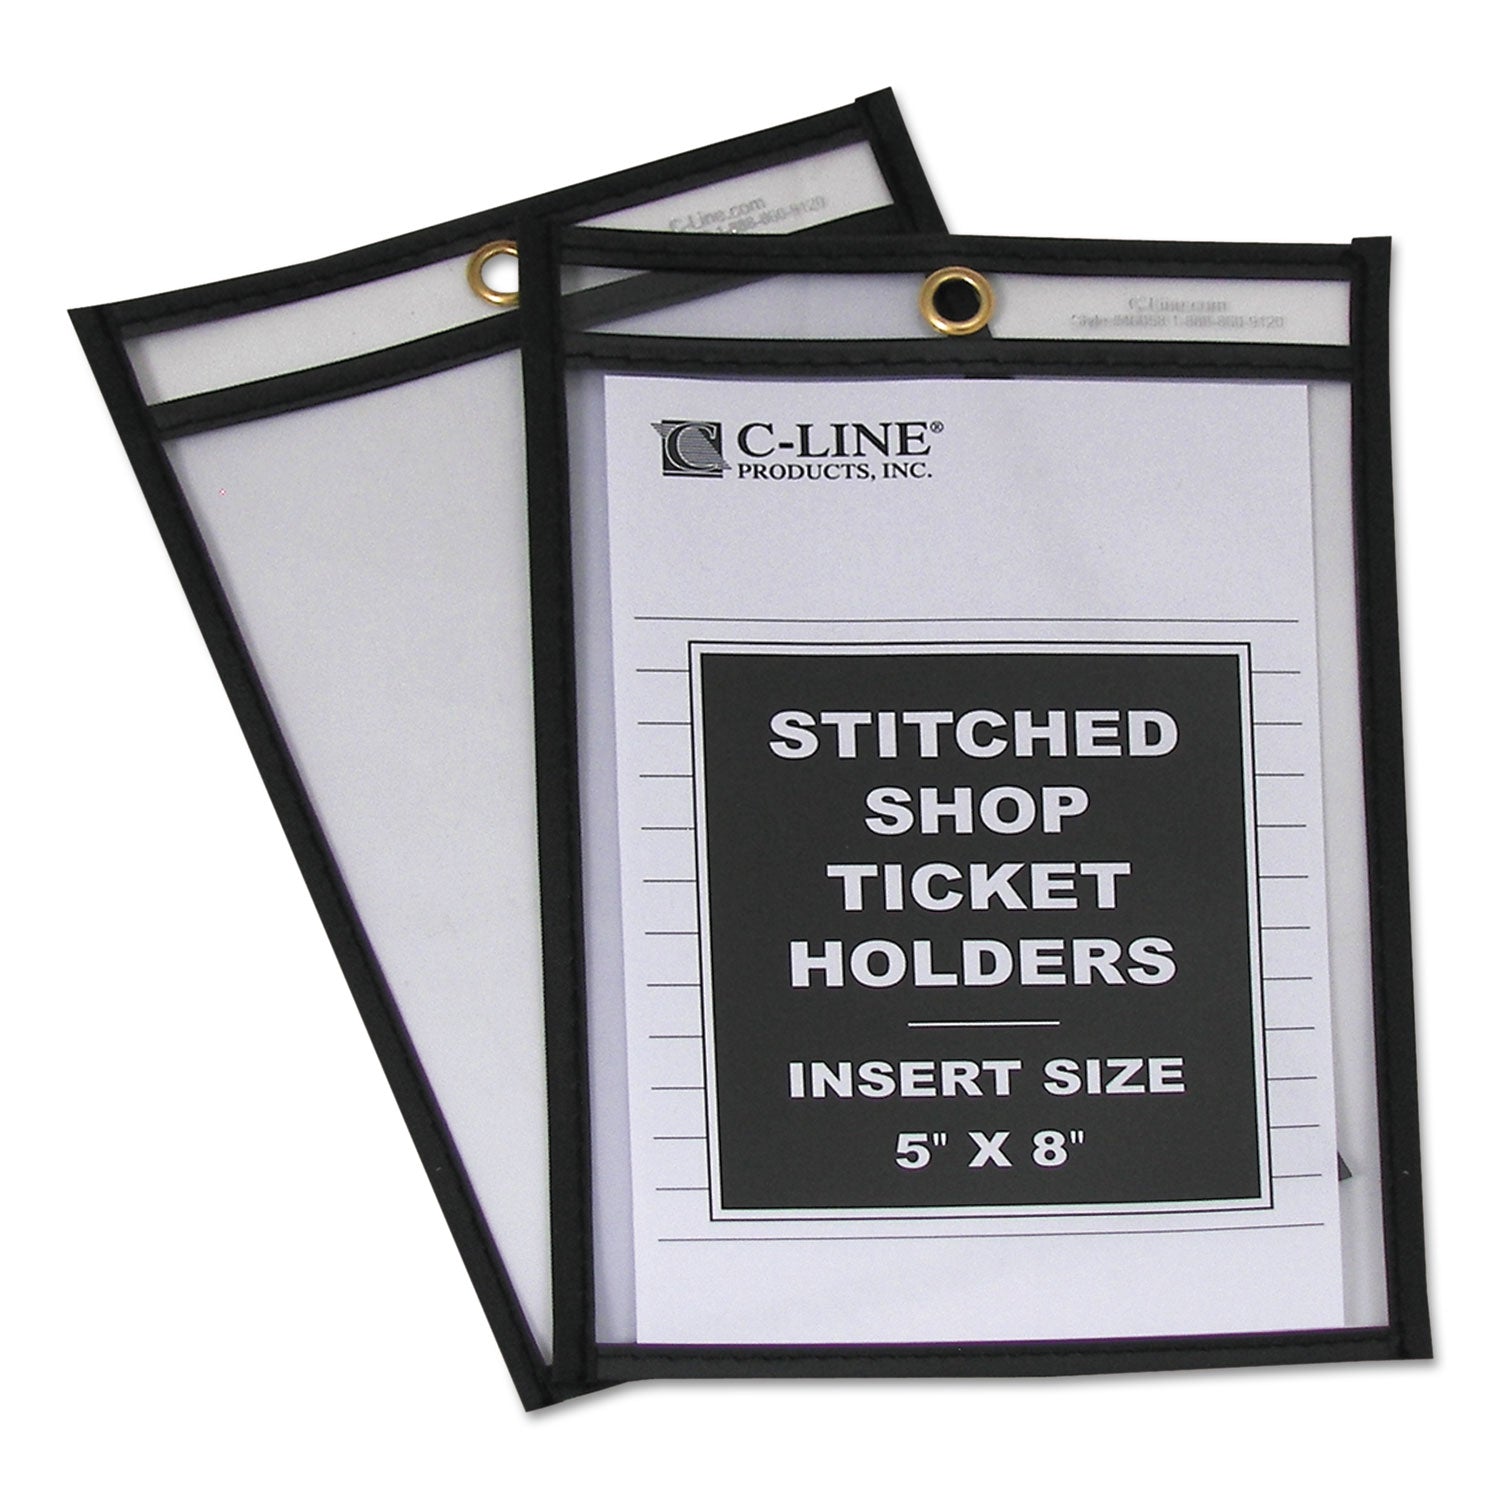 shop-ticket-holders-stitched-both-sides-clear-25-sheets-5-x-8-25-box_cli46058 - 1